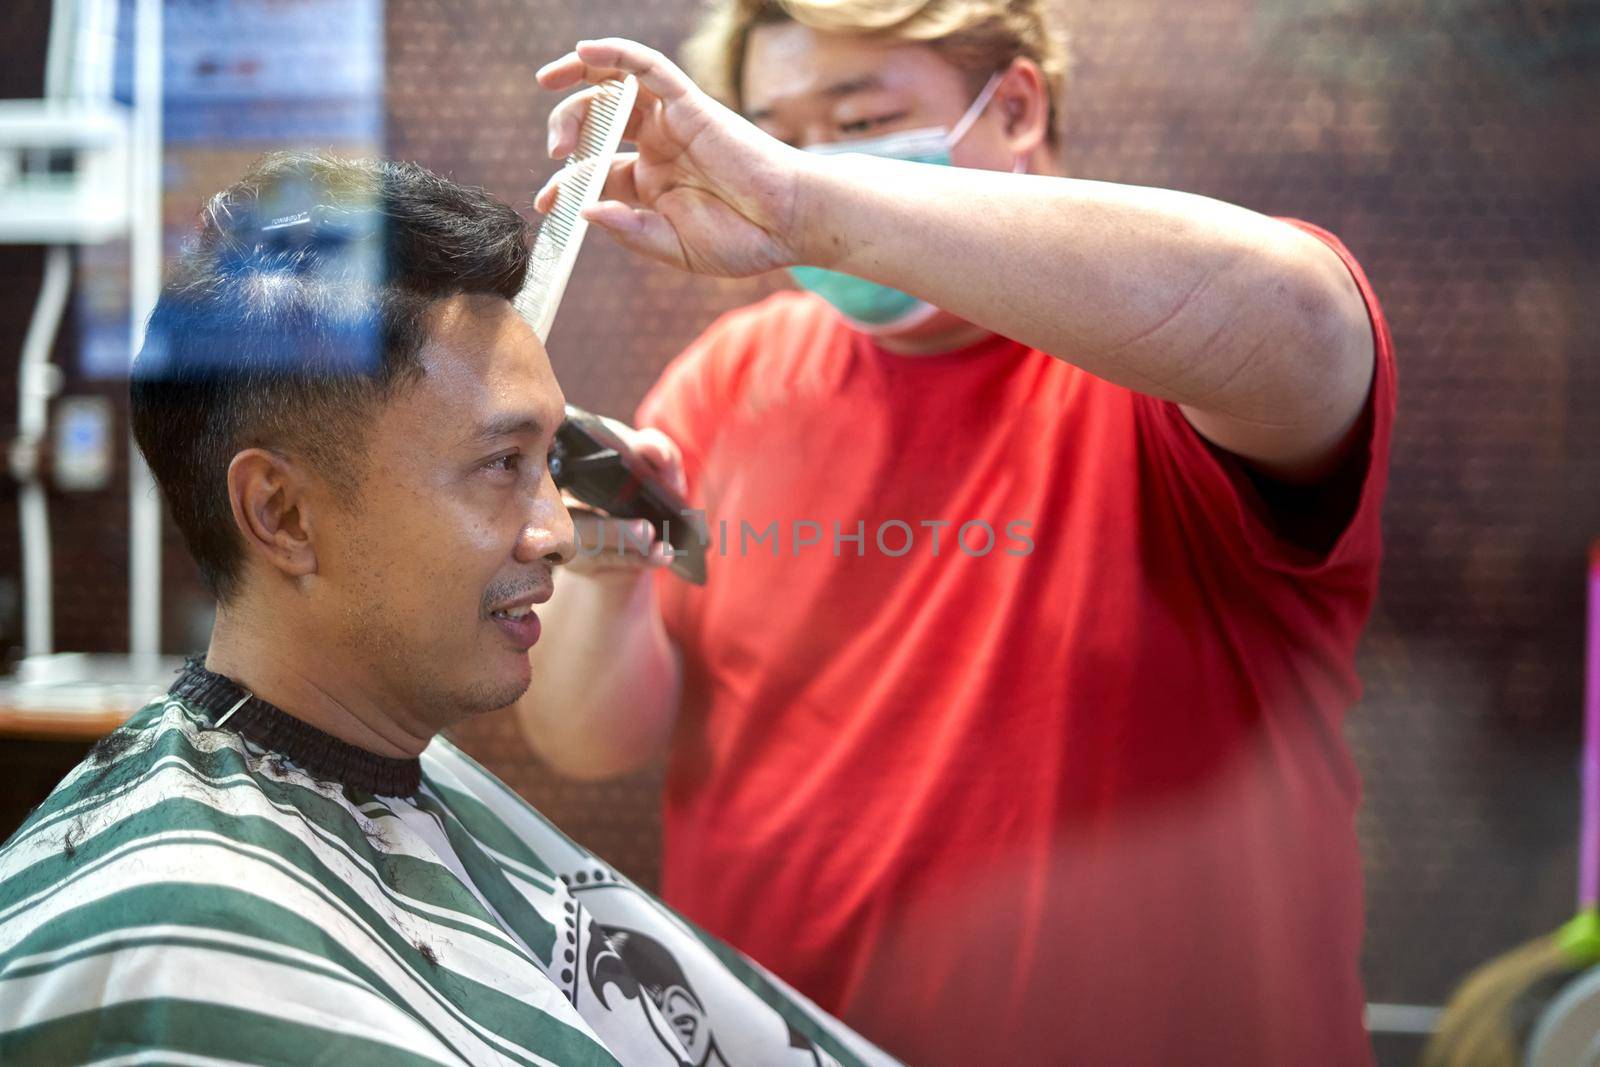 Profile of a fat asian barber with facial mask cutting the hair of an asian client in a barber shop